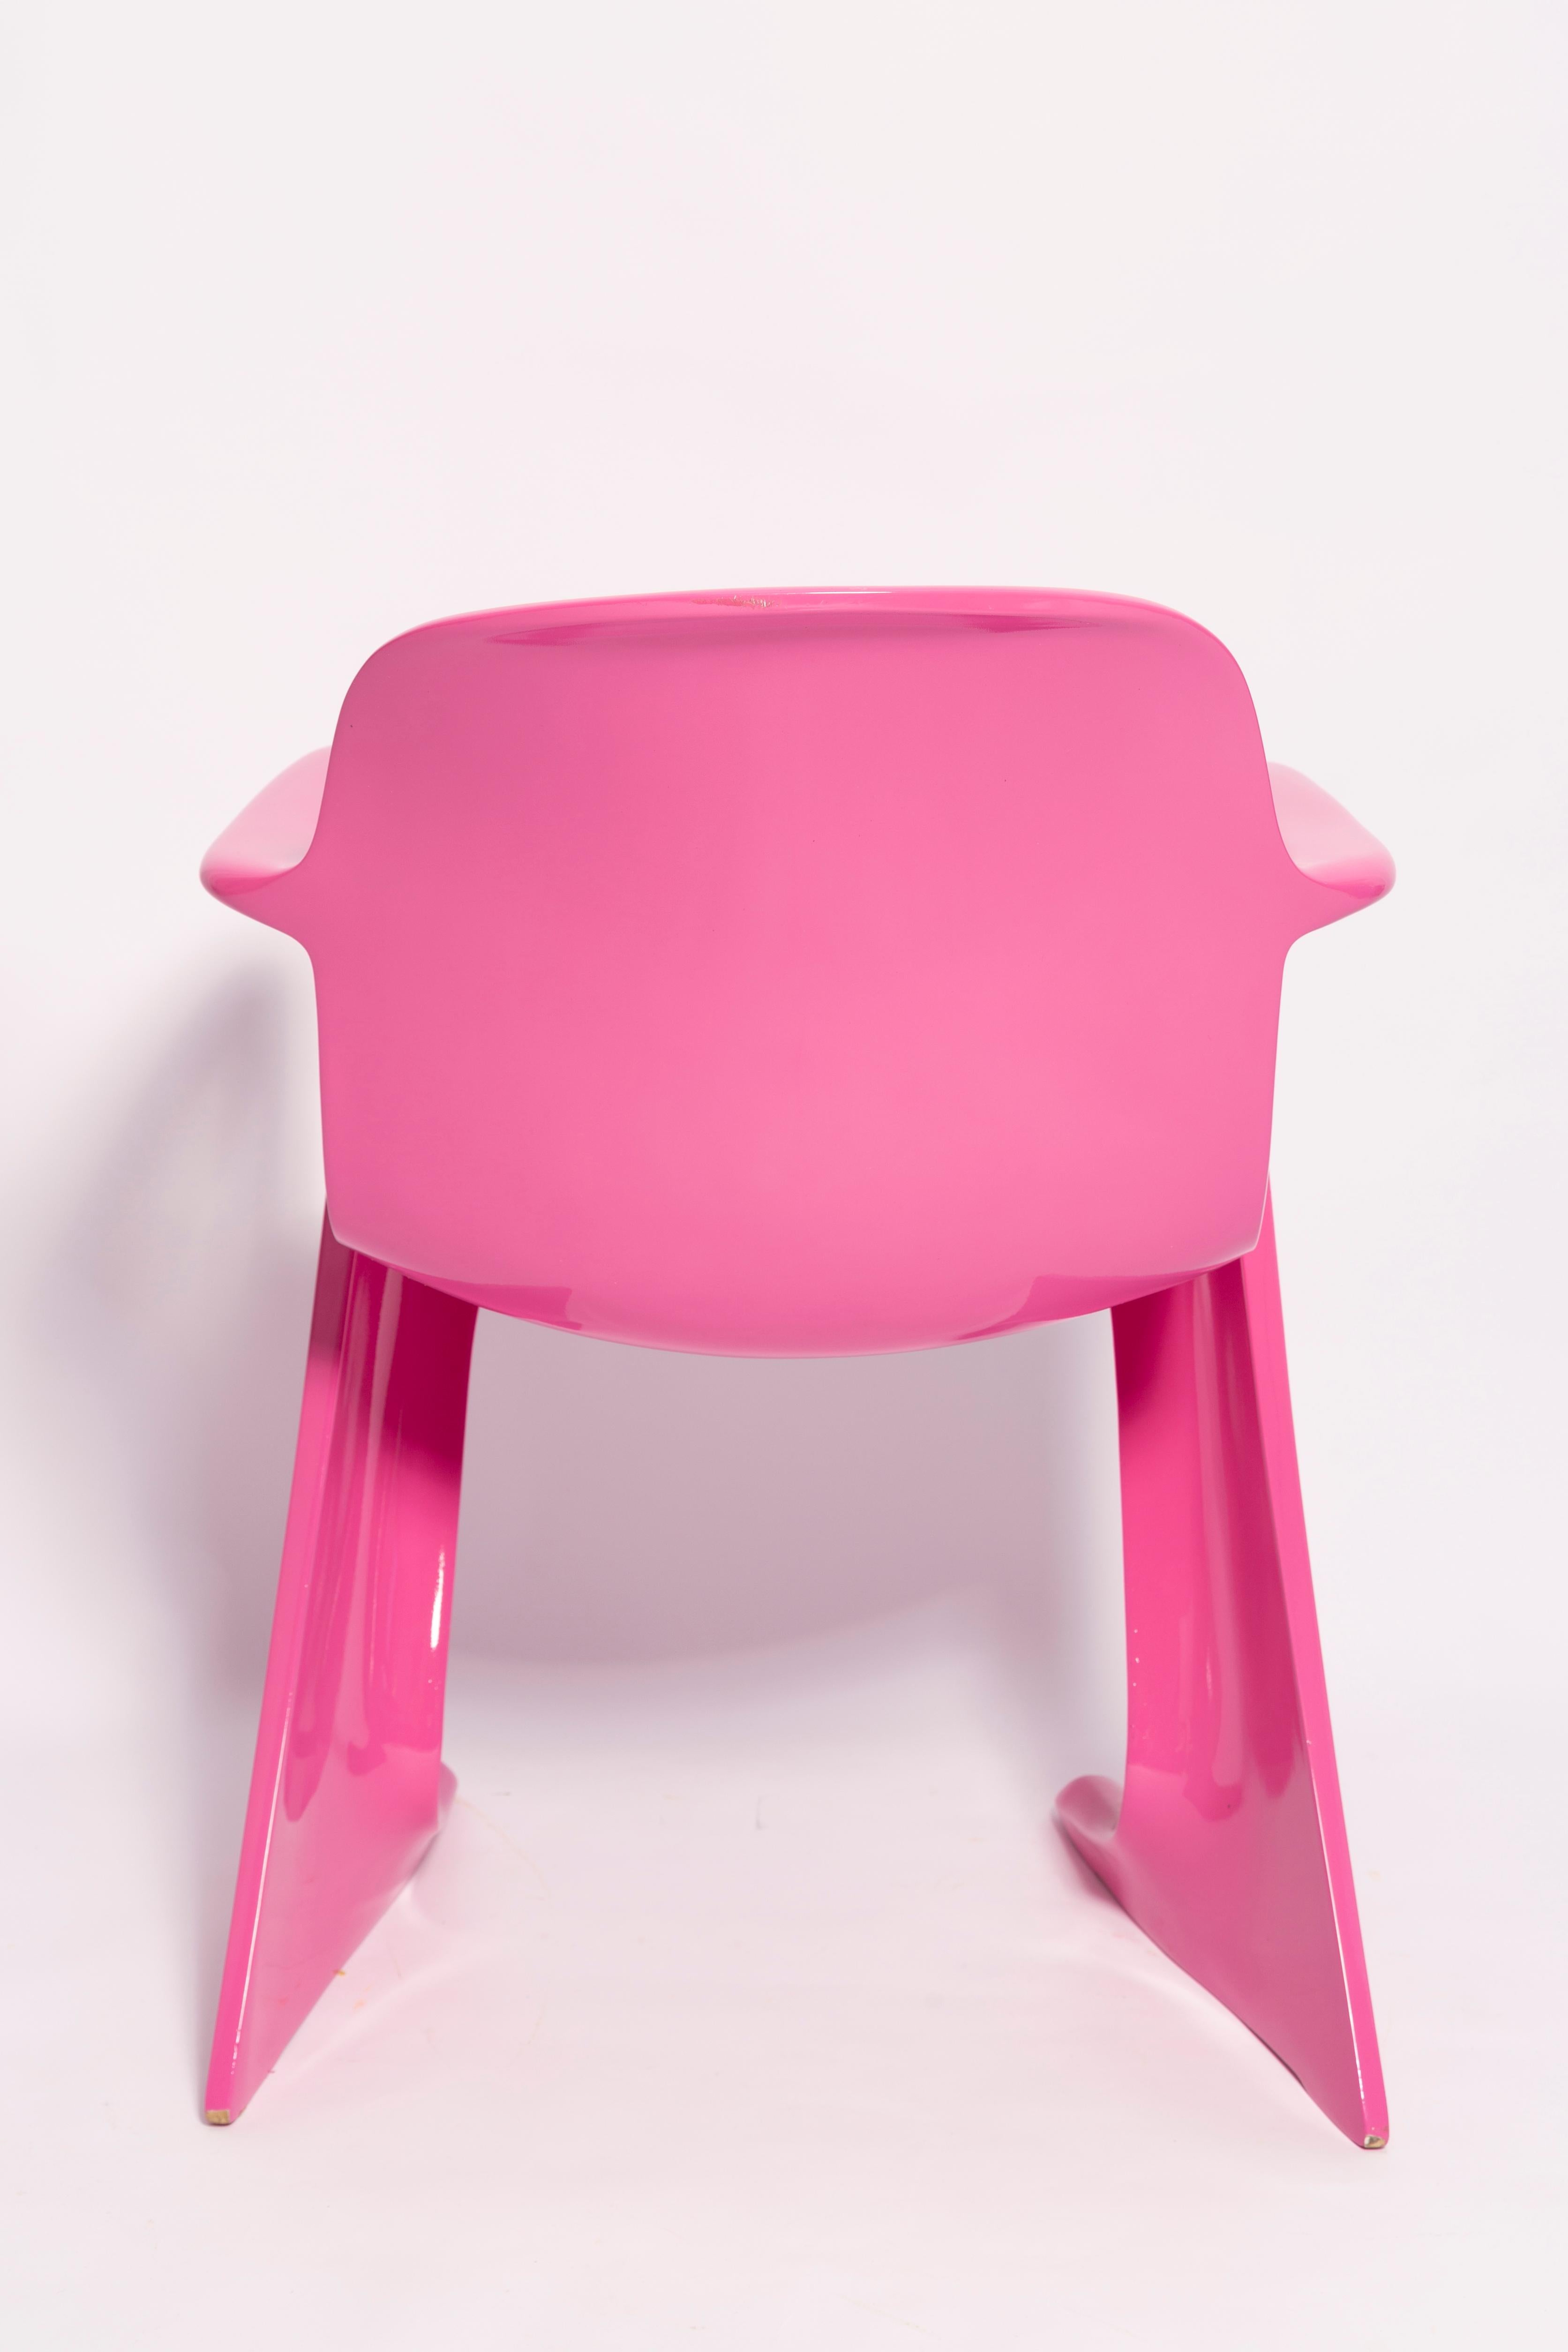 20th Century Set of Four Mid Century Pink Kangaroo Chairs, Ernst Moeckl, Germany, 1960s For Sale